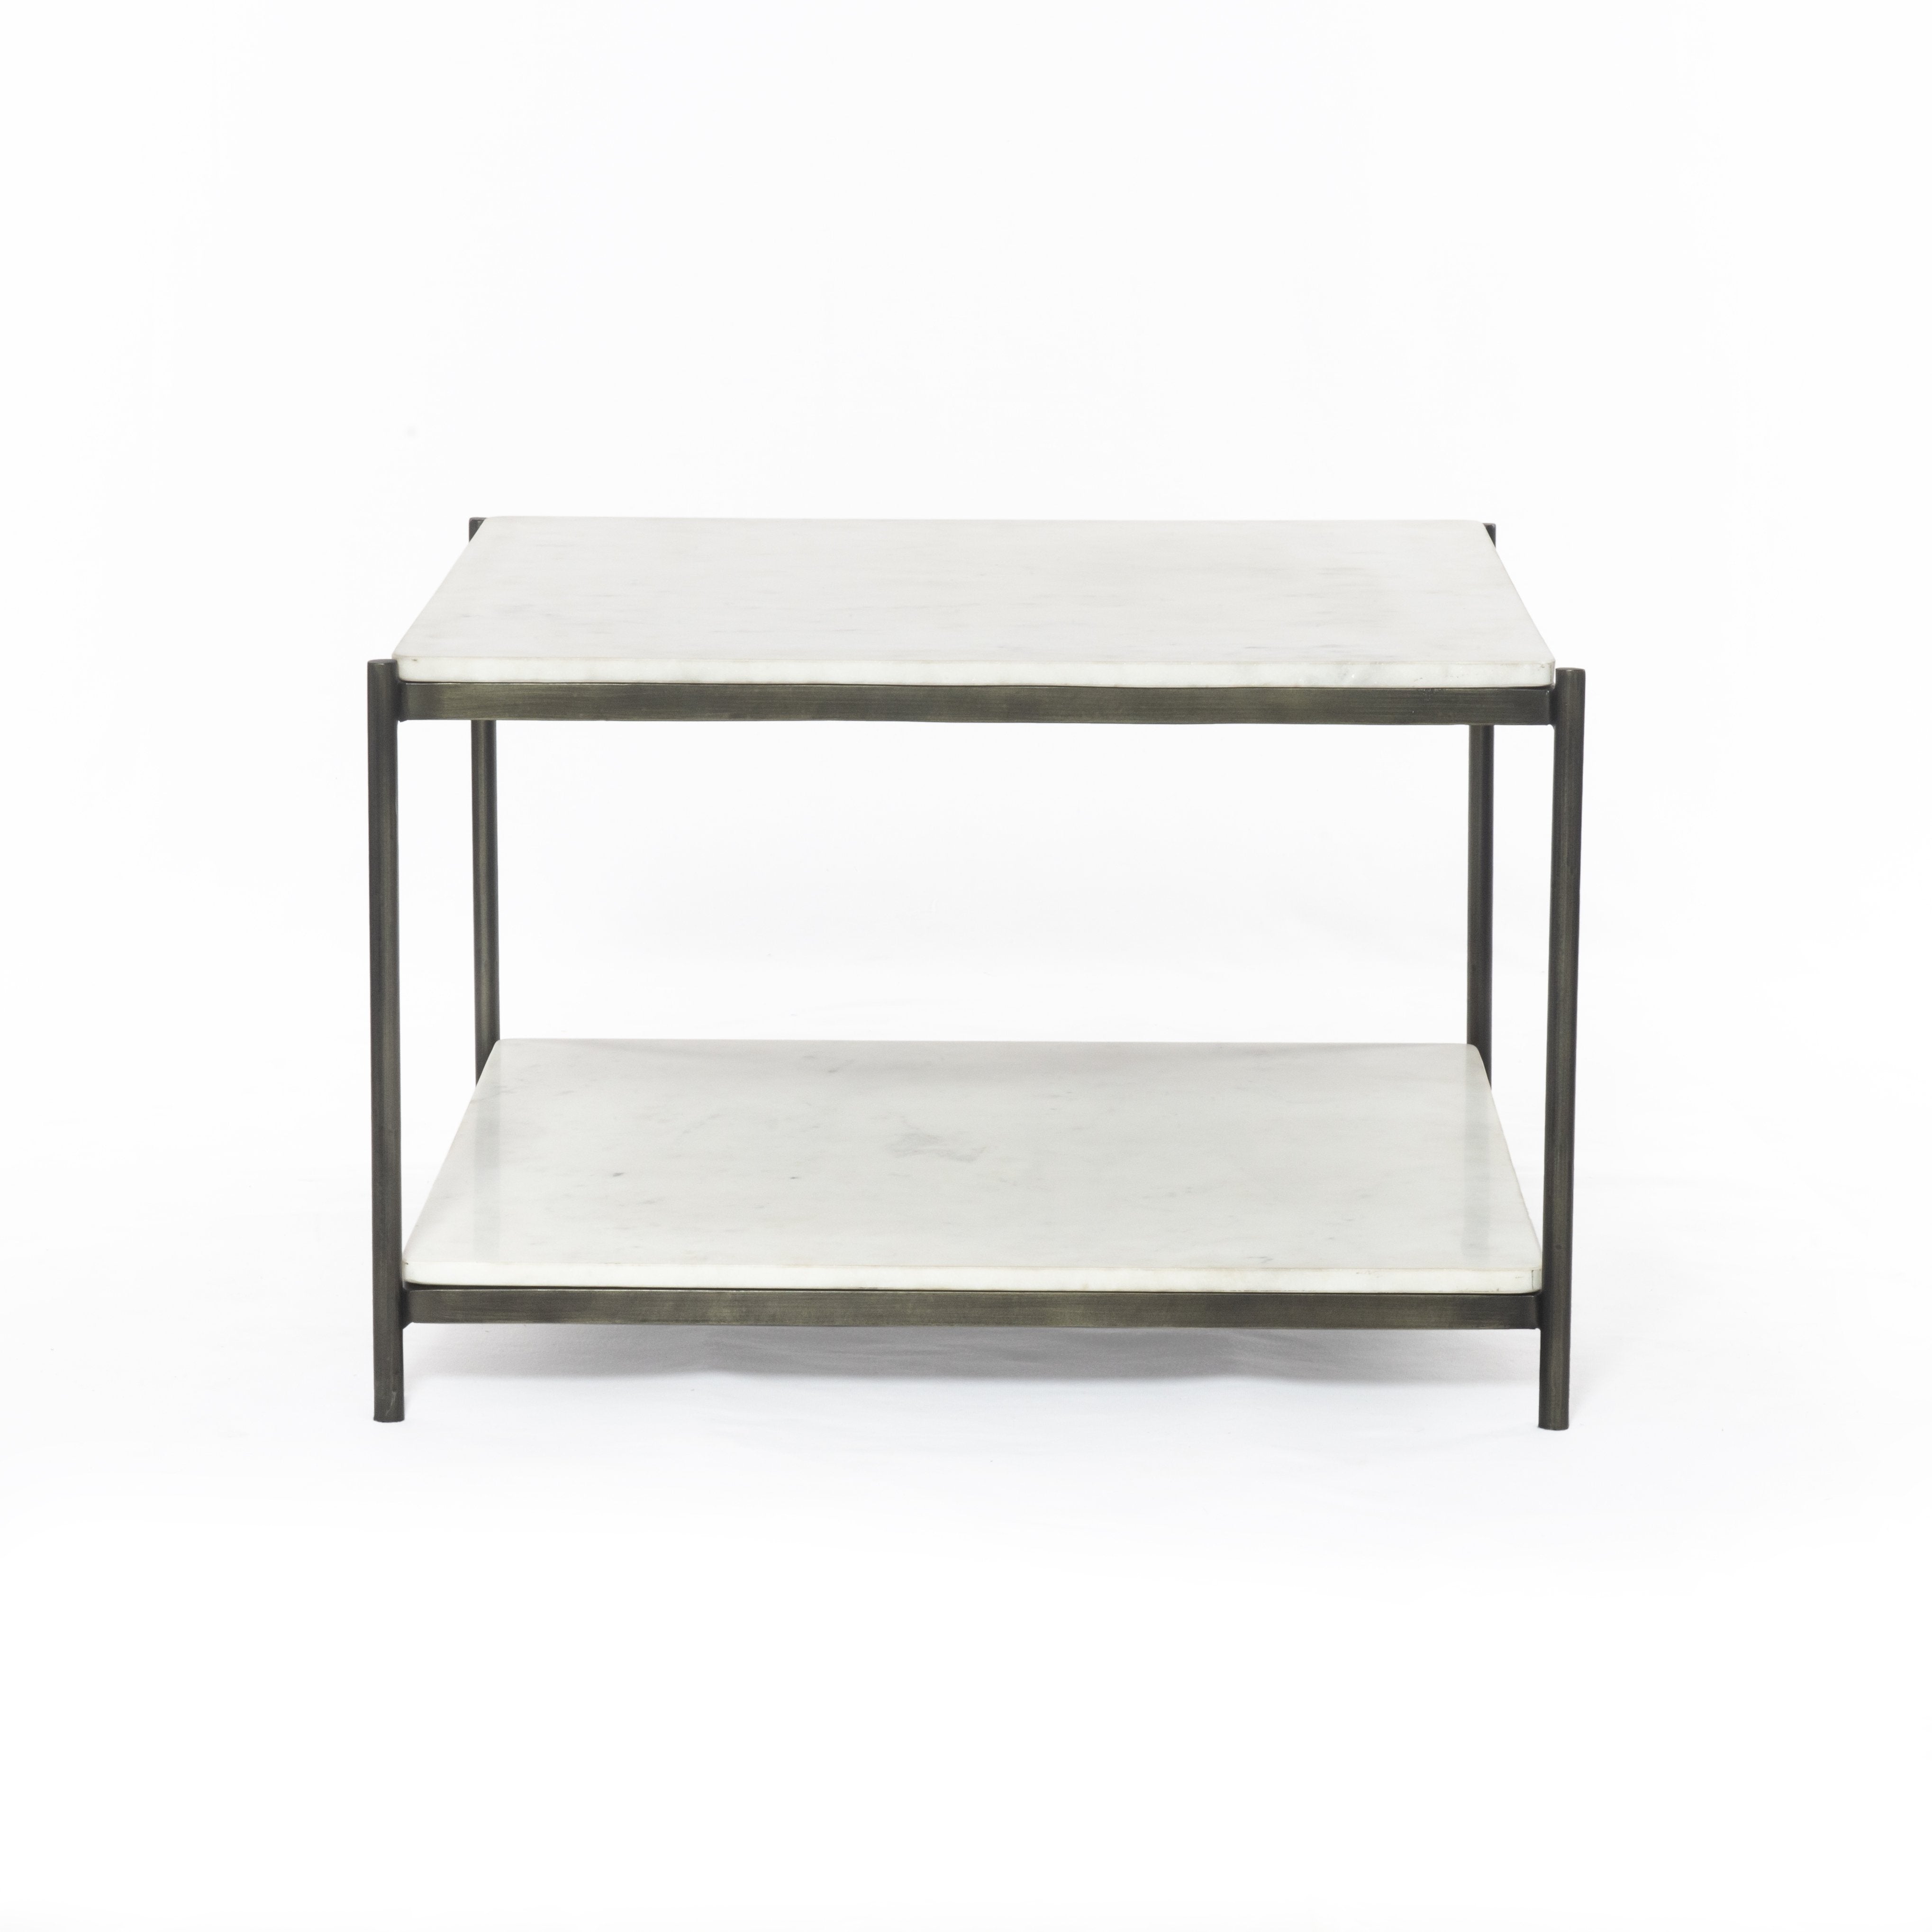 We love the sophisticated look the marble paired with the iron frame brings to this Felix Hammered Grey Bunching Table. The bottom shelve is both functional and beautiful!  Overall Dimensions: 25.00"w x 25.00"d x 16.00"h Materials: Iron, Marble Weight: 90.39 lb